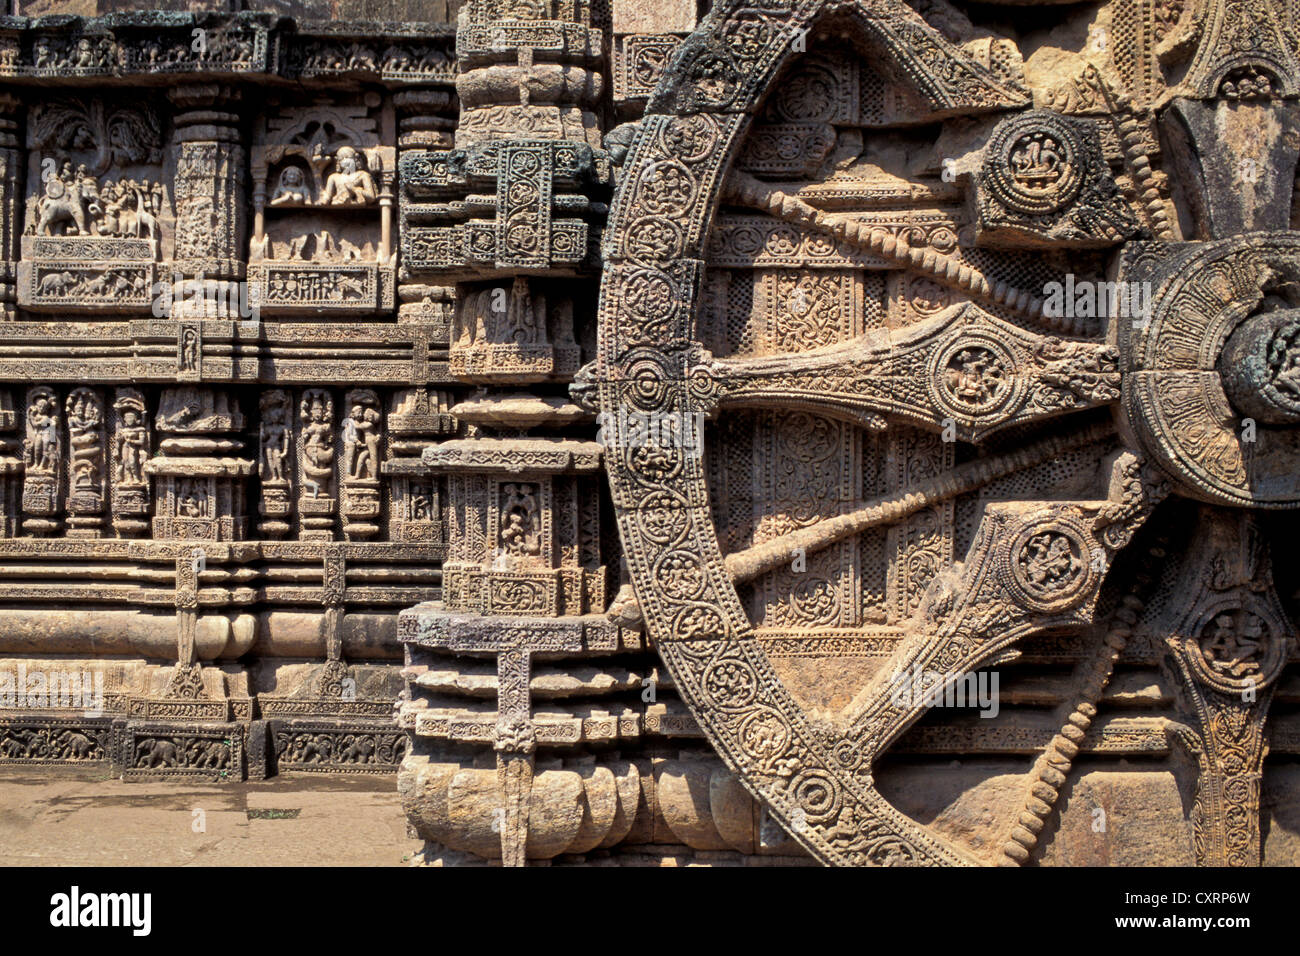 Wheel carved from stone, chariot of the Vedic sun god Surya, Surya Temple or Sun Temple, UNESCO World Heritage Site Stock Photo